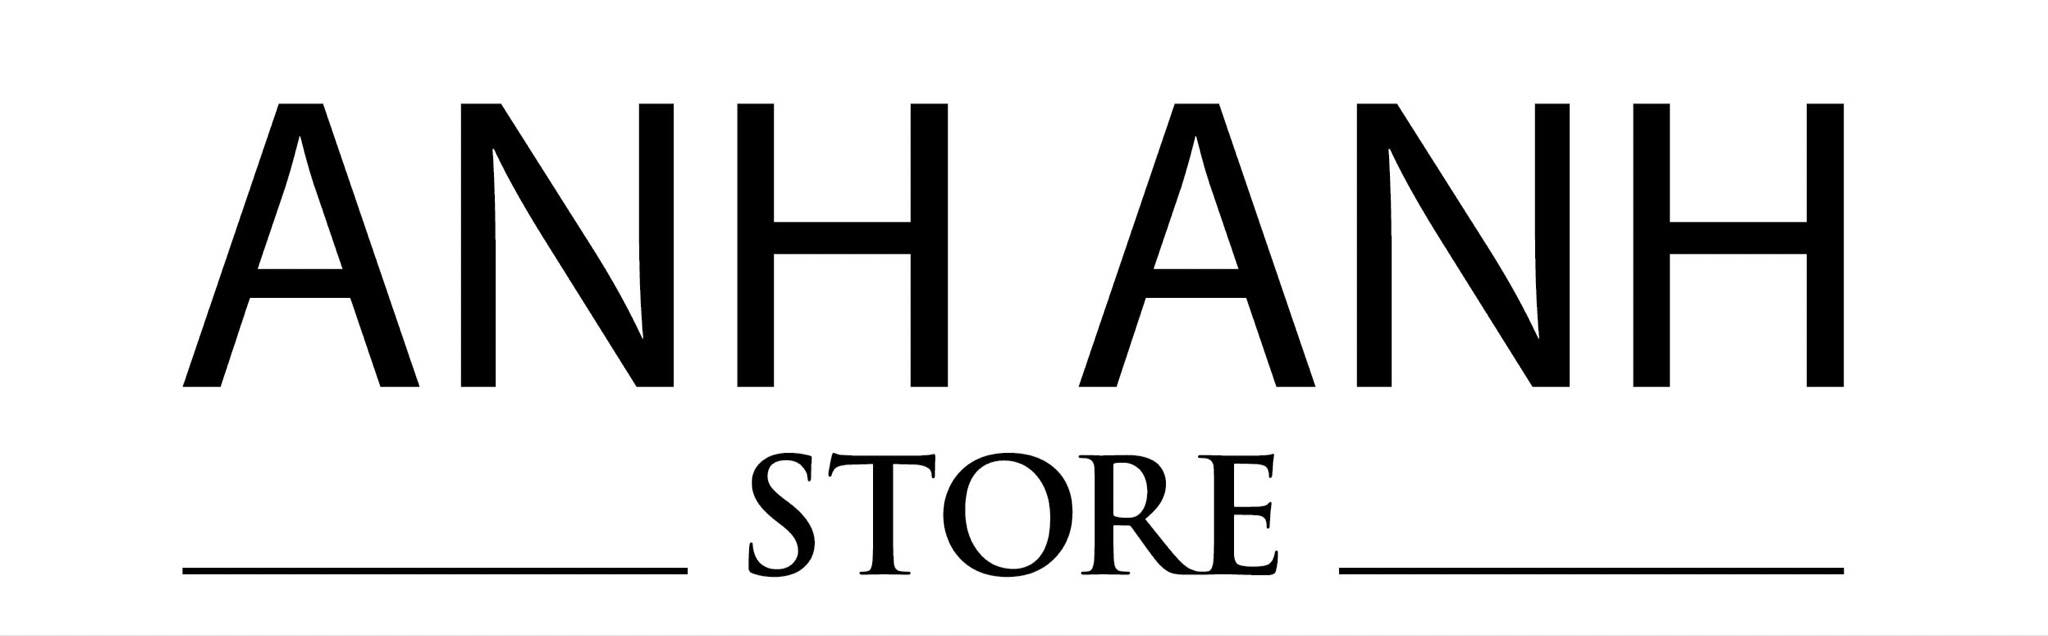 Anh Anh Store